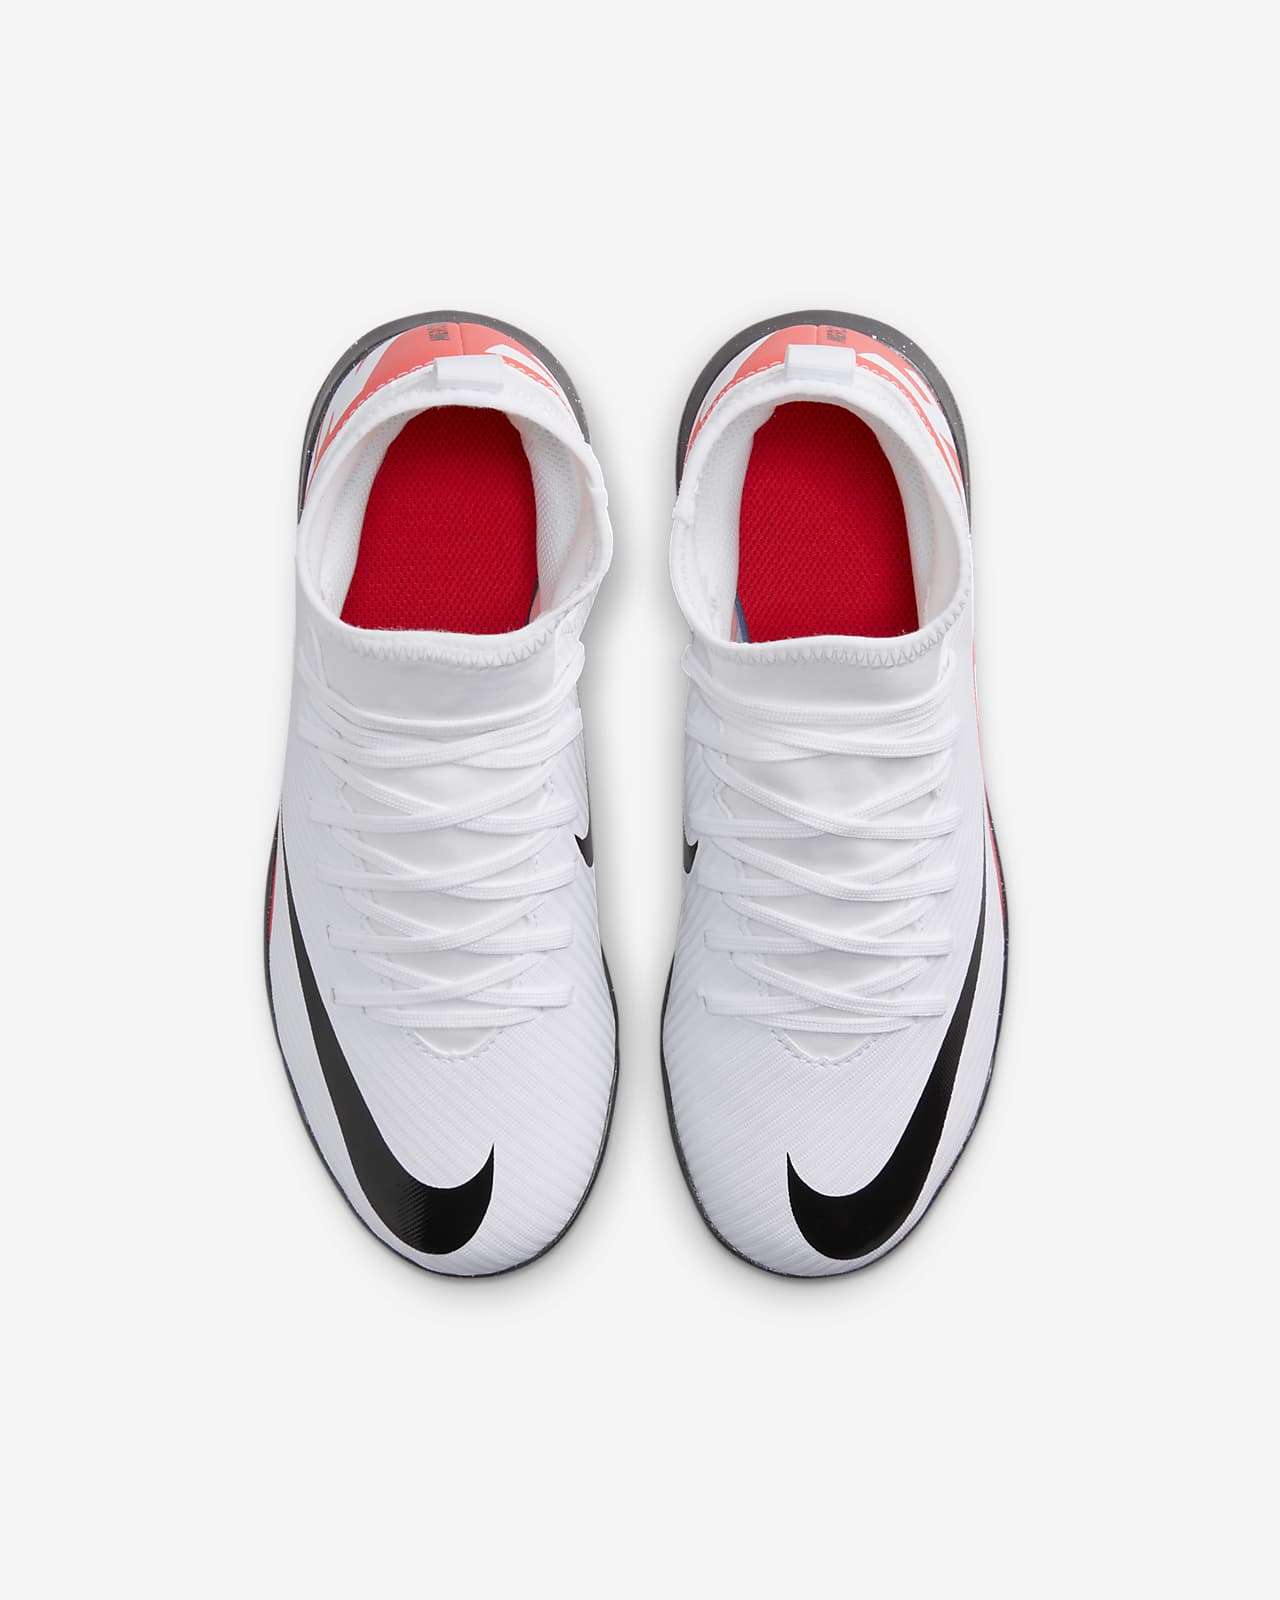 Women and Kids in Unique Offers (7), nike mercurial turf shoes